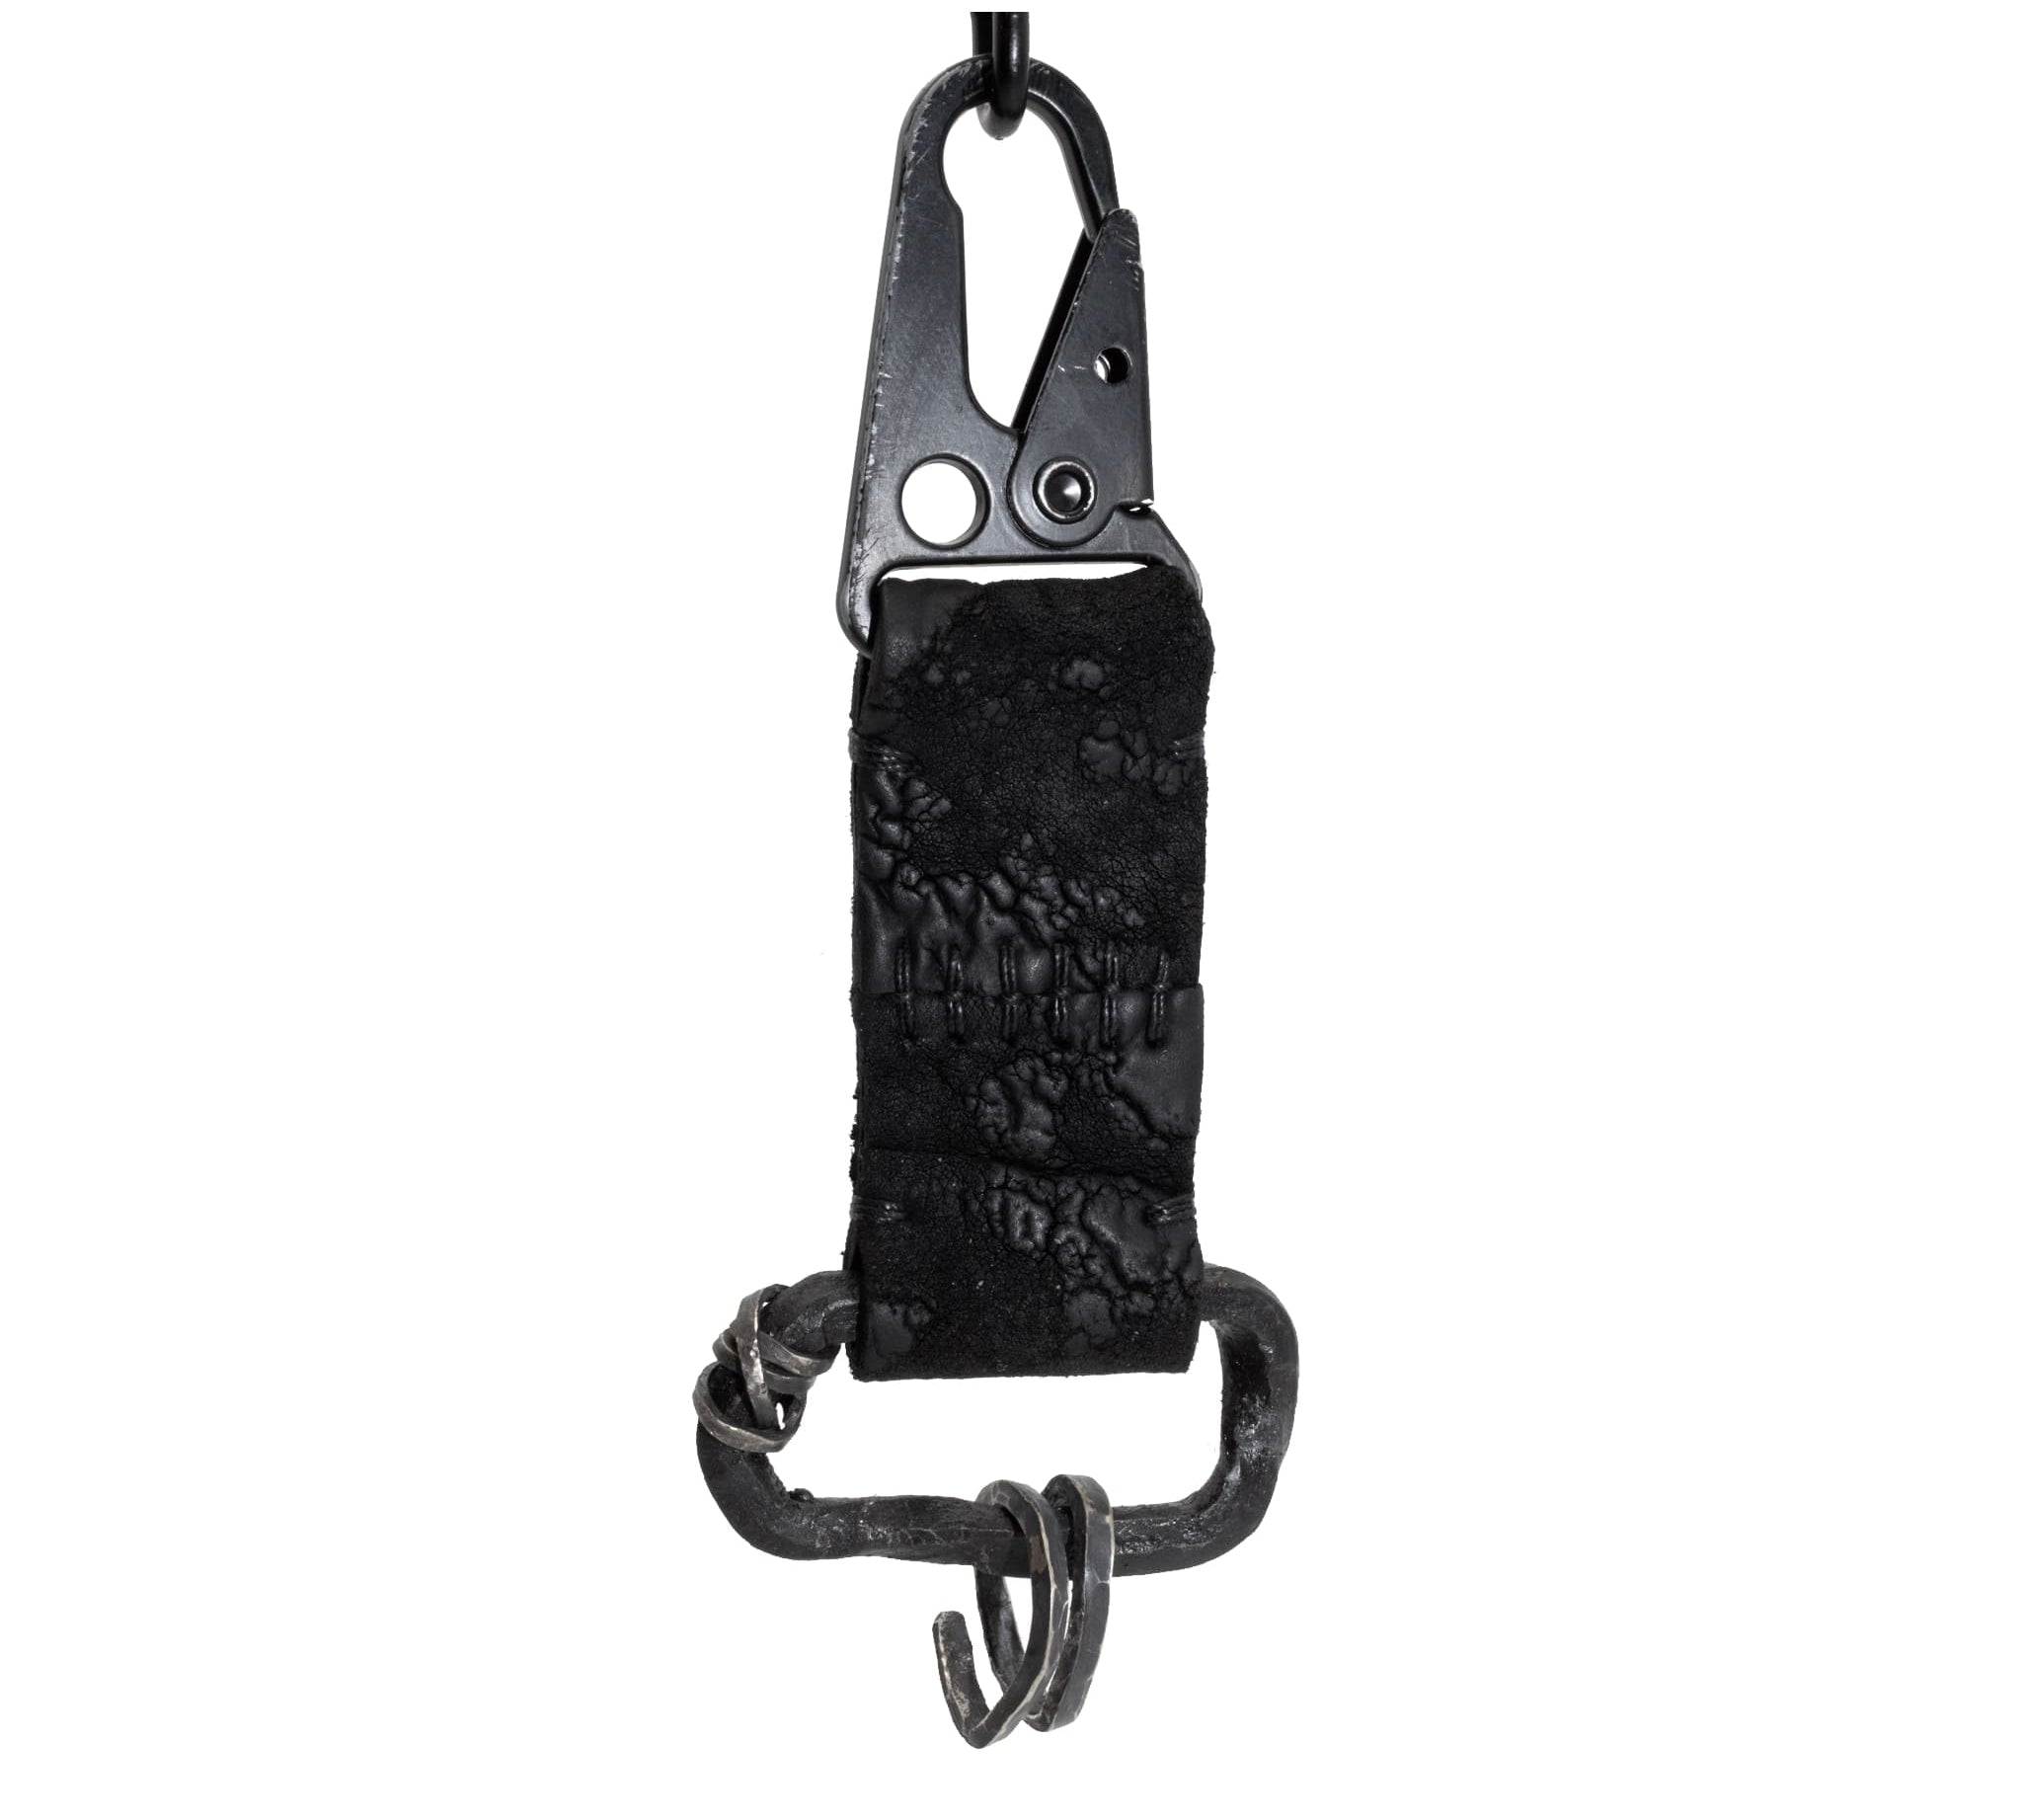 hand stitched black reverse horse culatta leather keychain with a military clip and hand forged iron hardware with .925 sterling silver details.